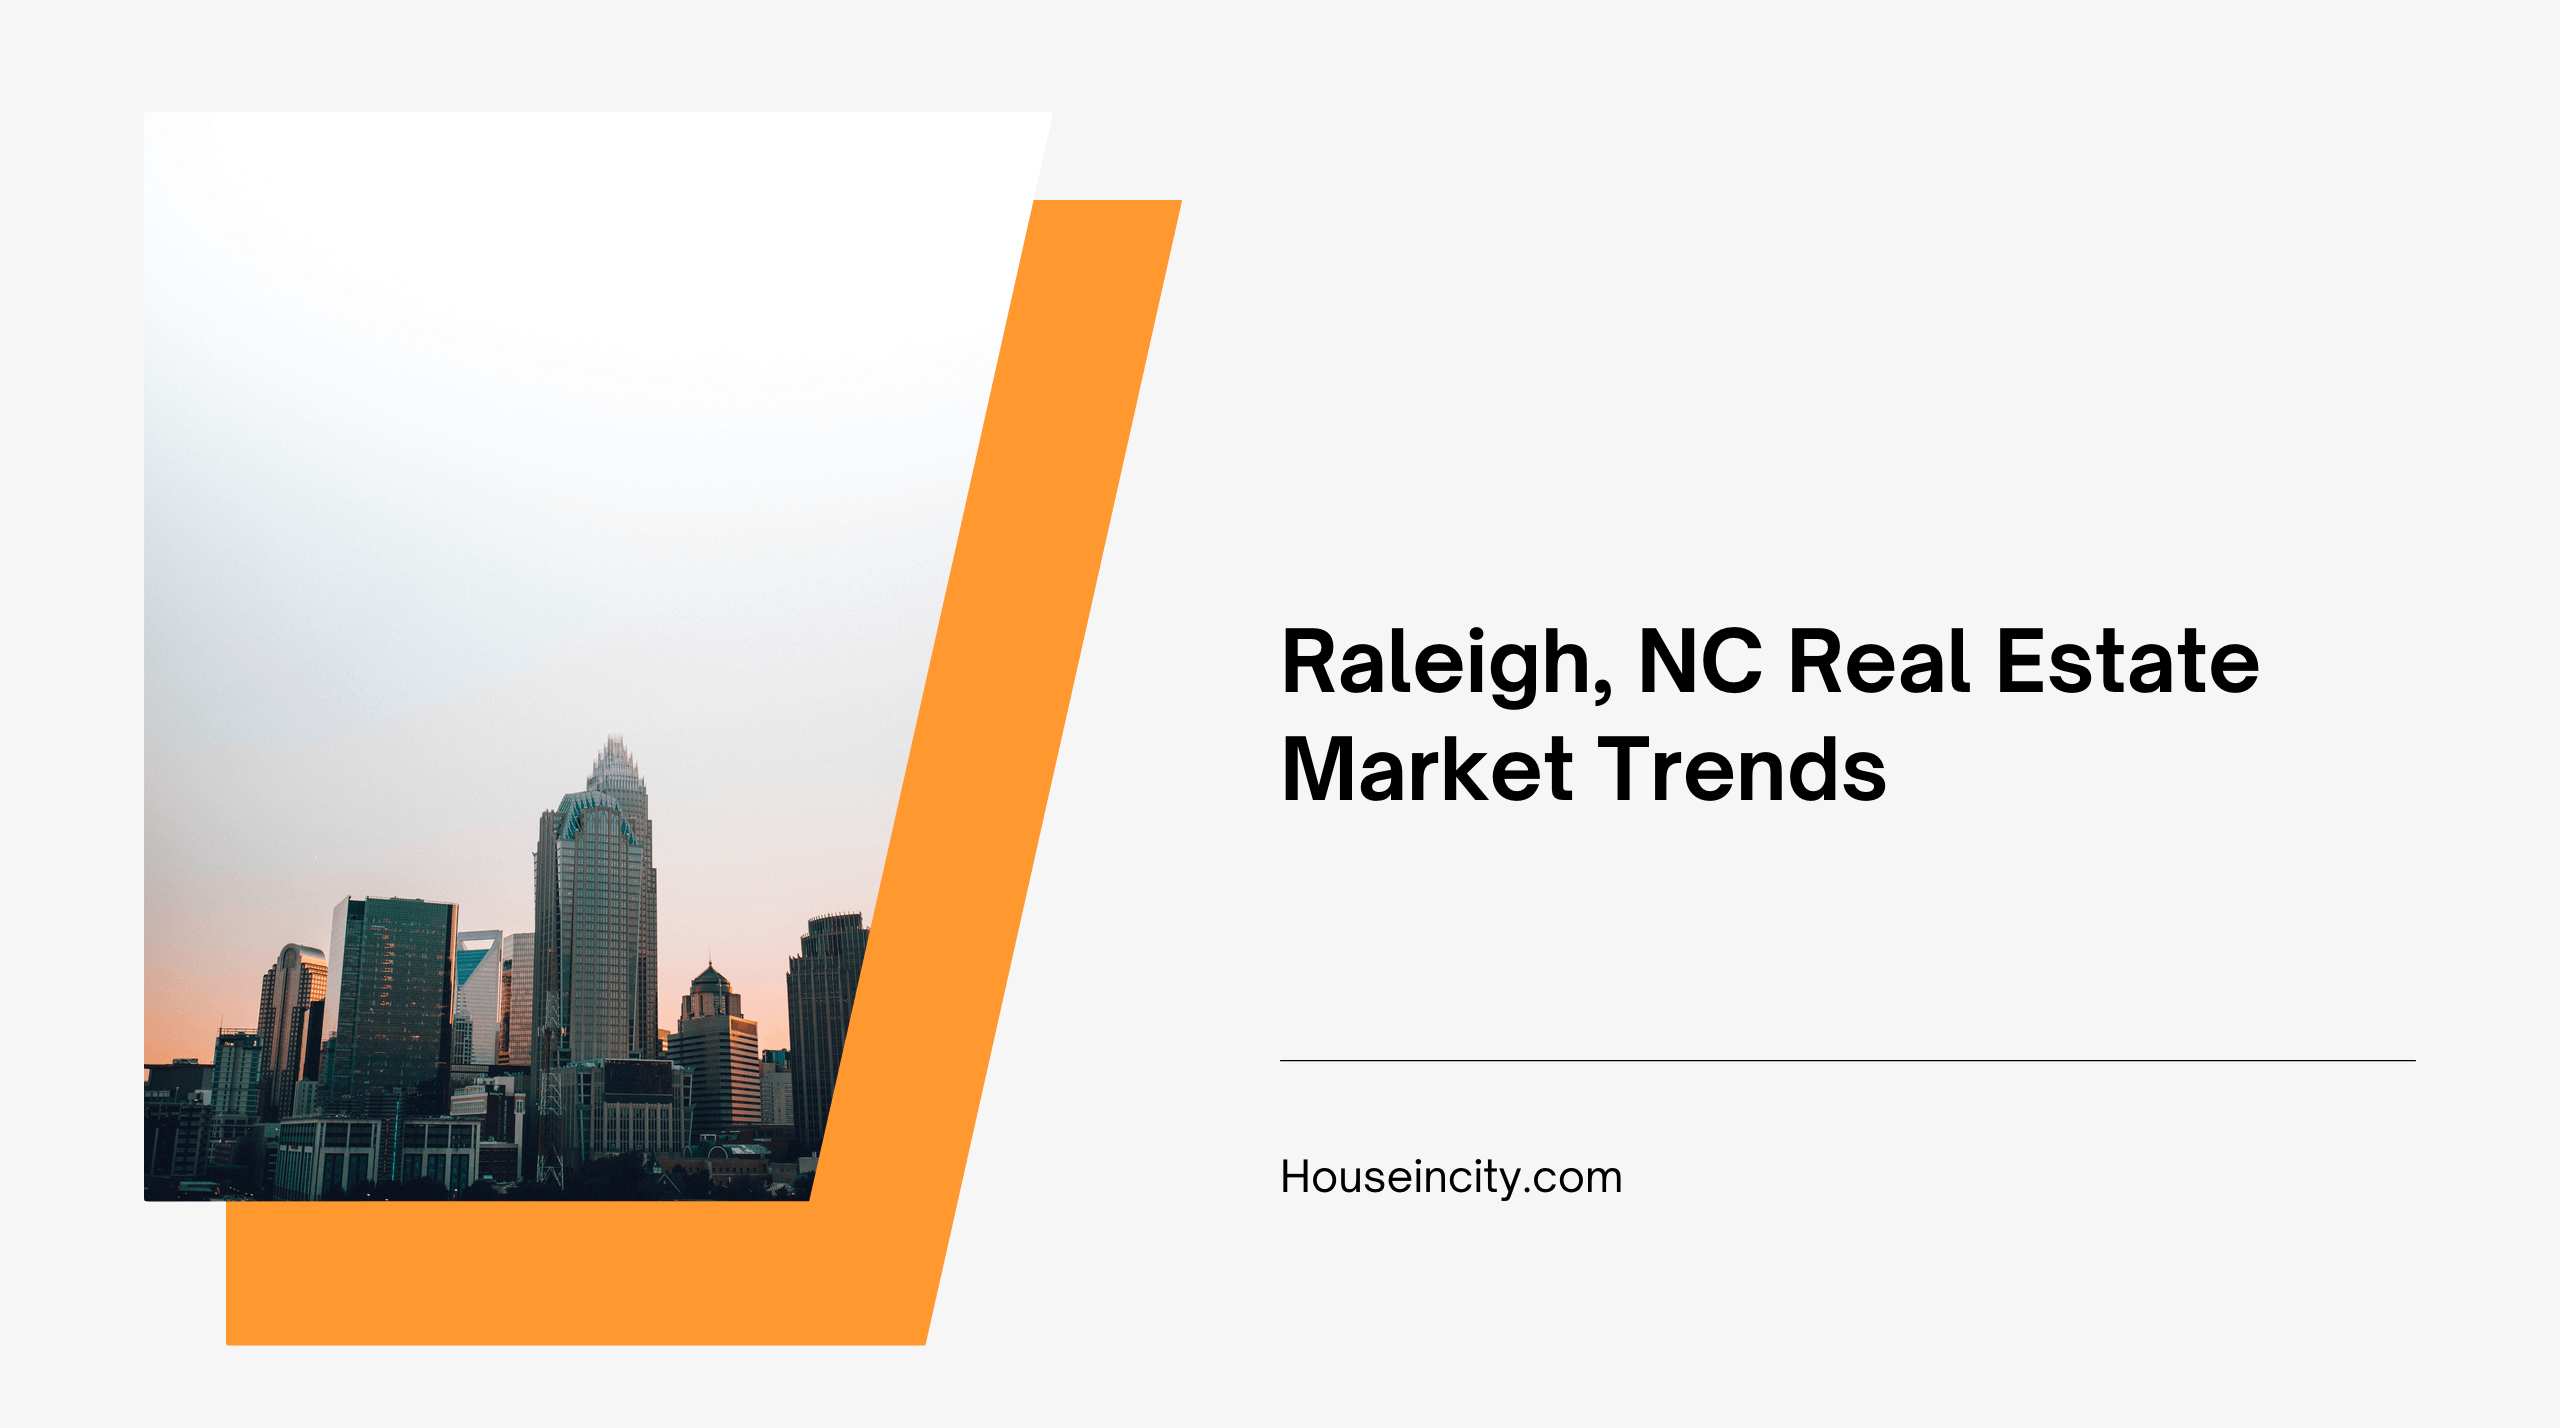 Raleigh, NC Real Estate Market Trends